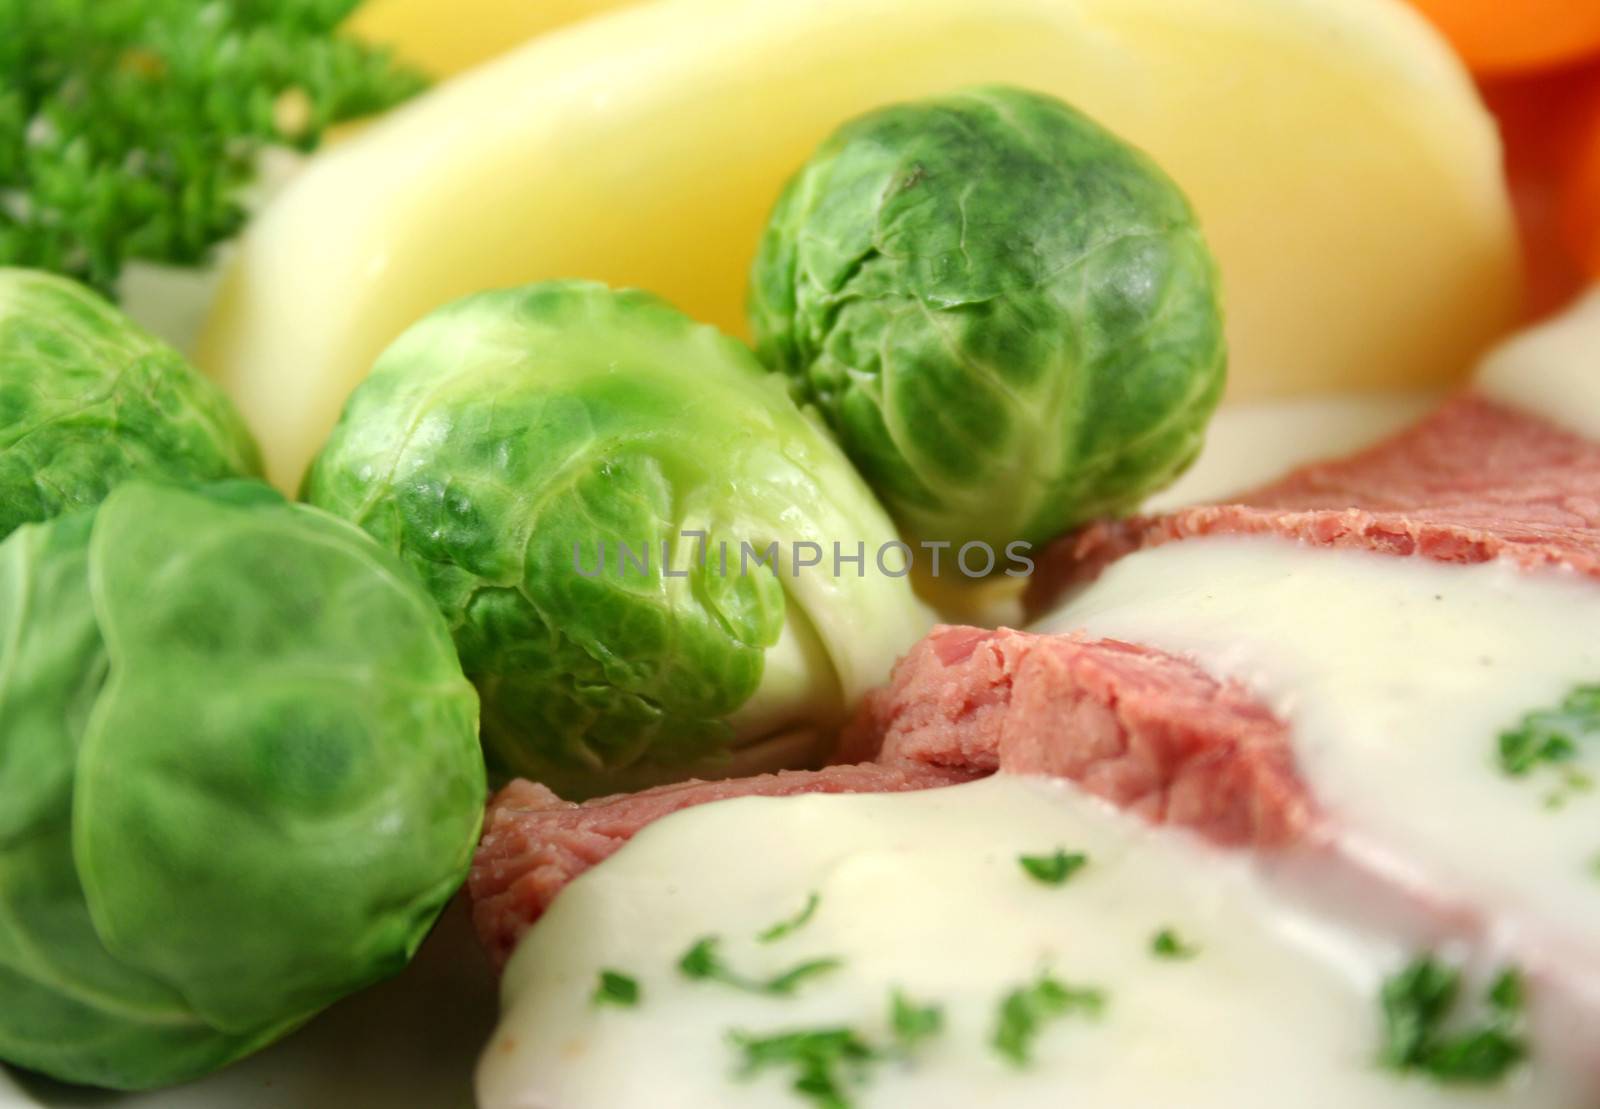 Brussels Sprouts And Corn Beef by jabiru